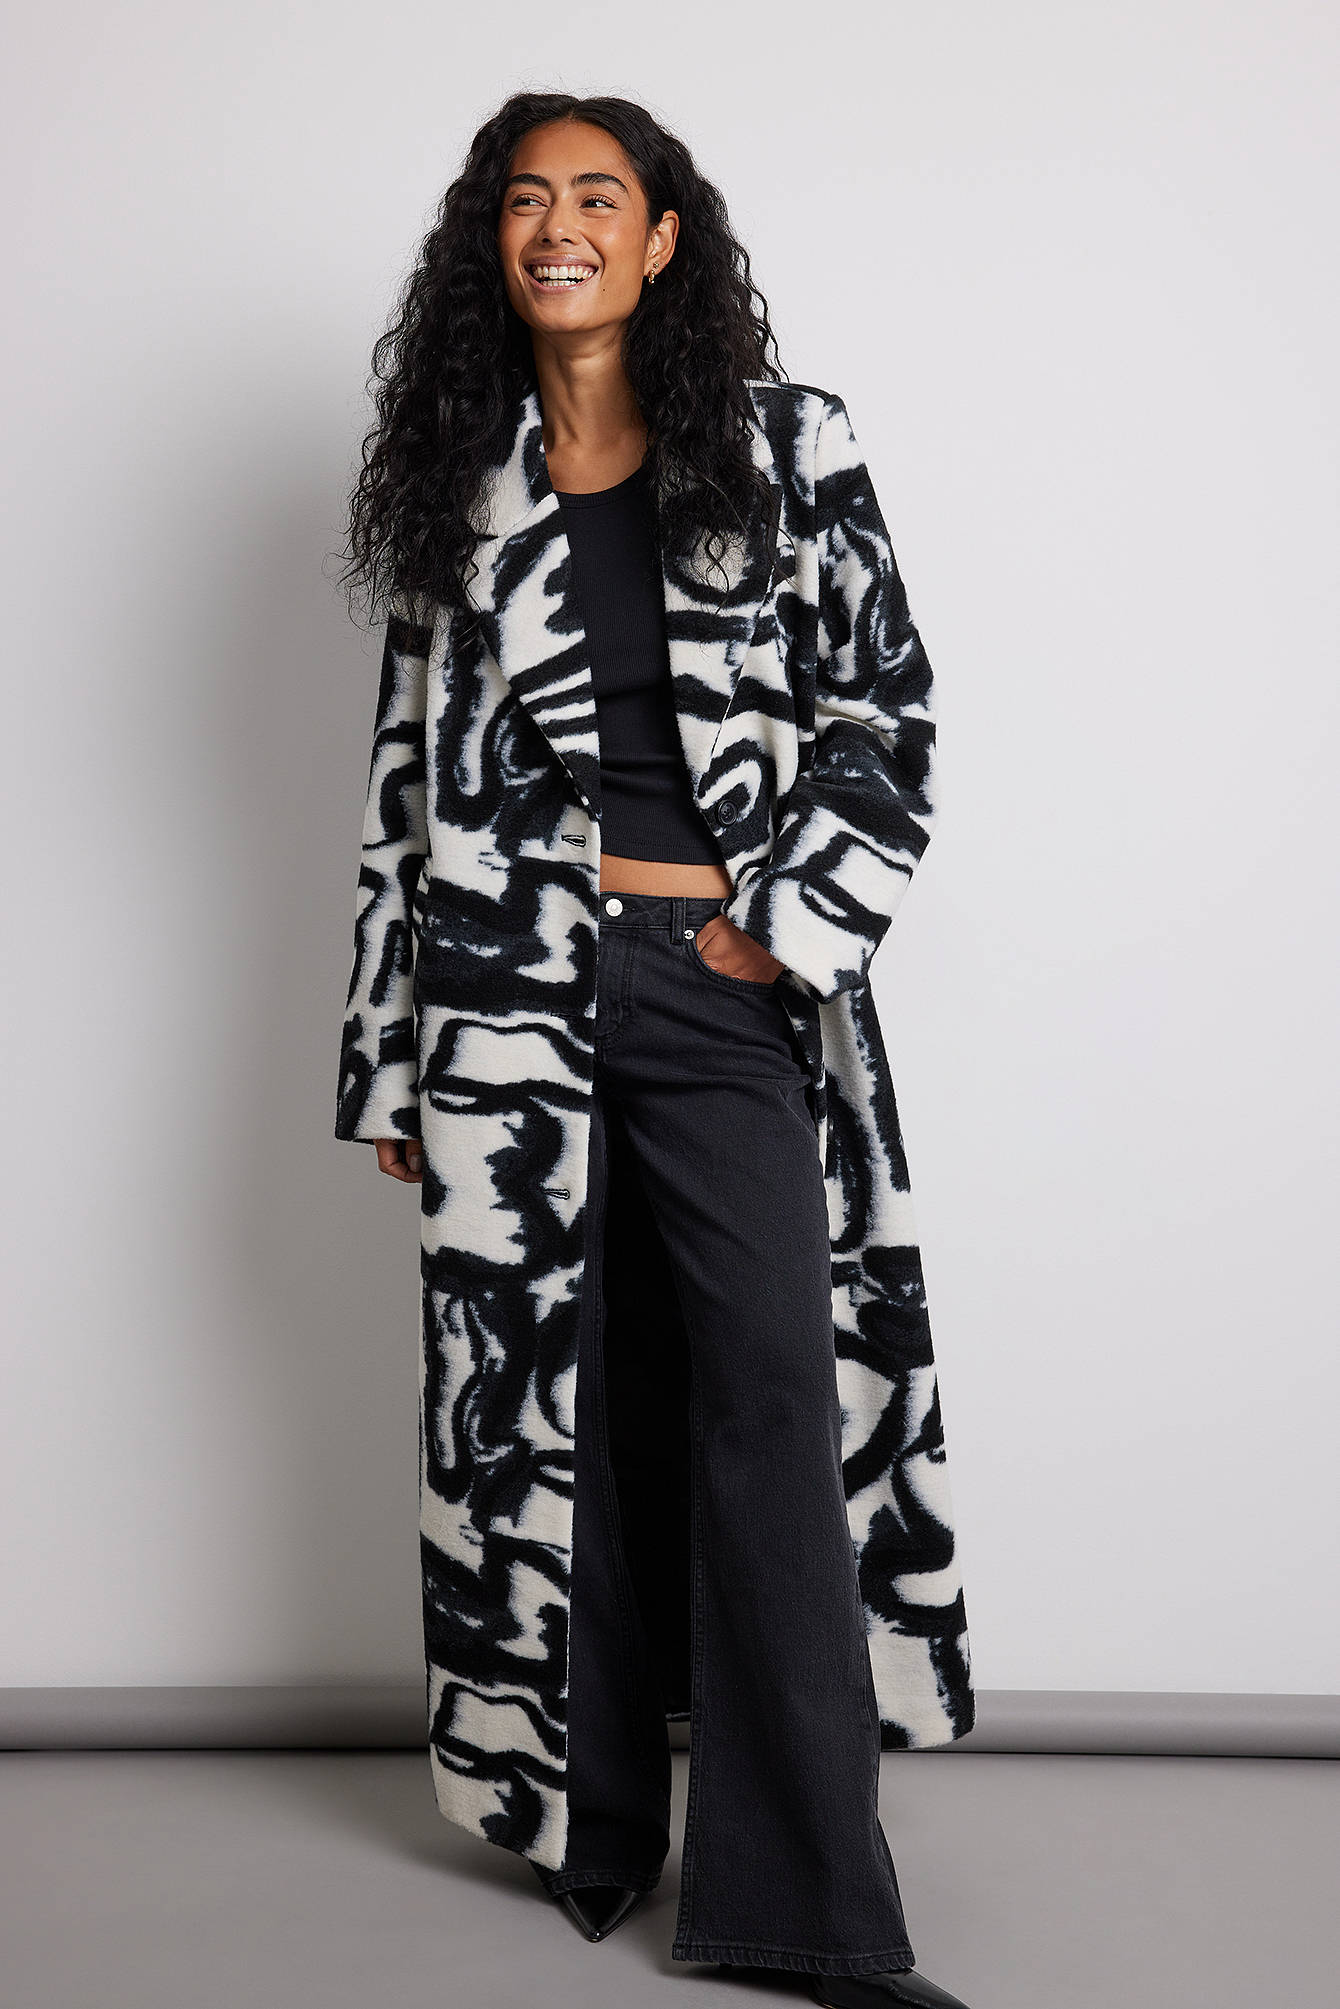 Maxi Printed Coat Outfit.